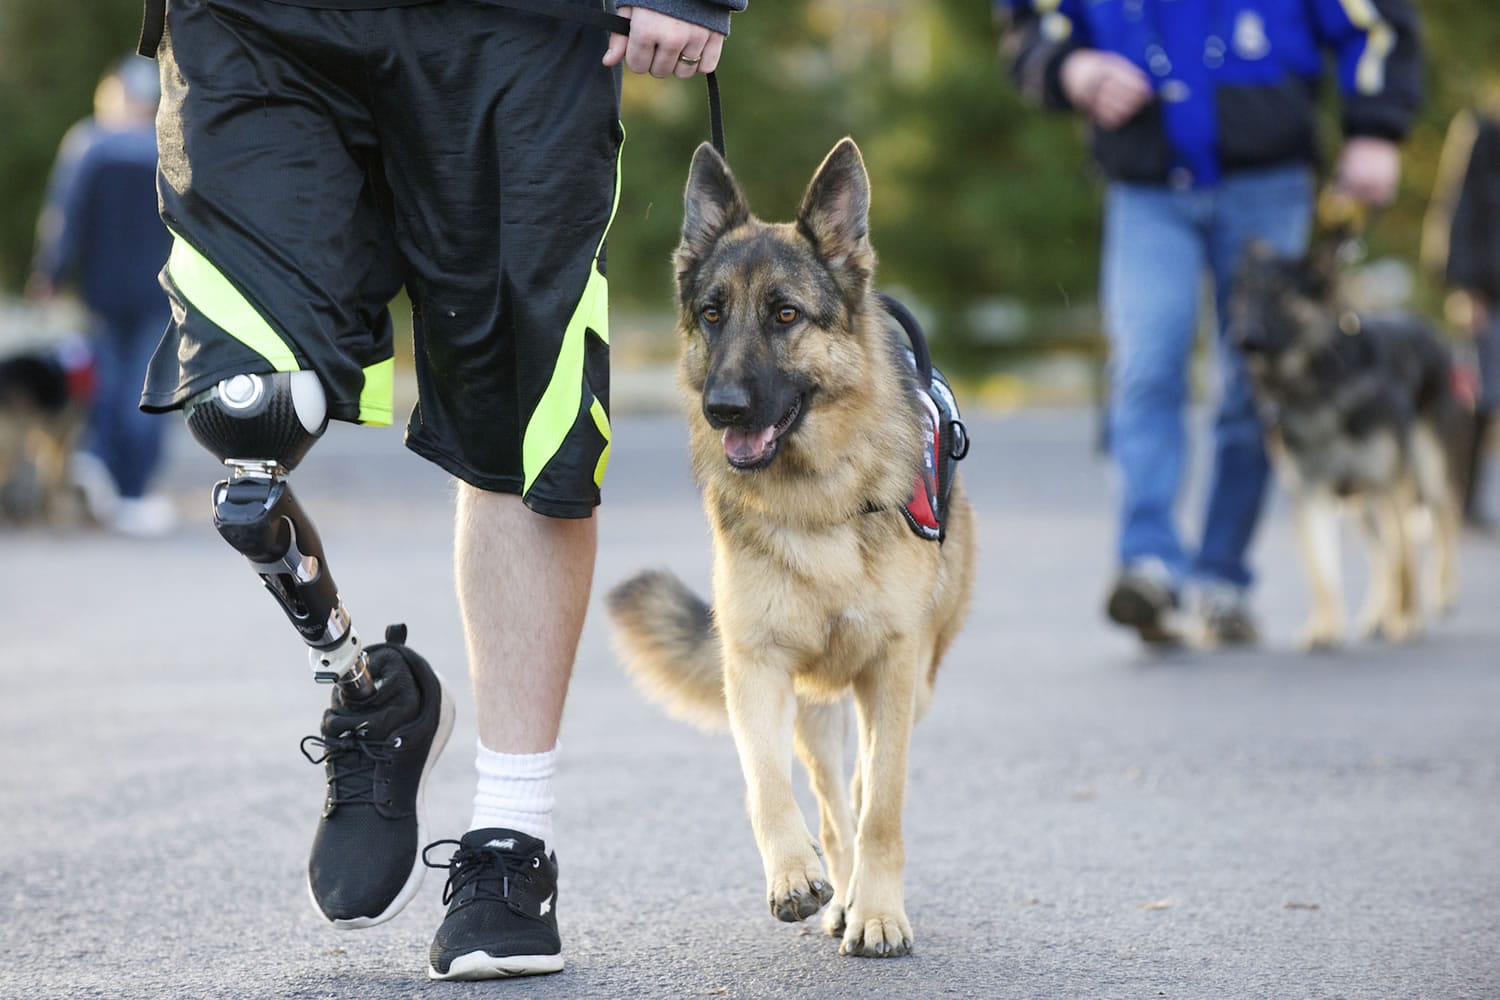 Justin Carey trains his new service dog Shiva, Wednesday, December 3, 2014. Carey lost his leg in a crash earlier this year and is training the dog with military veterans.